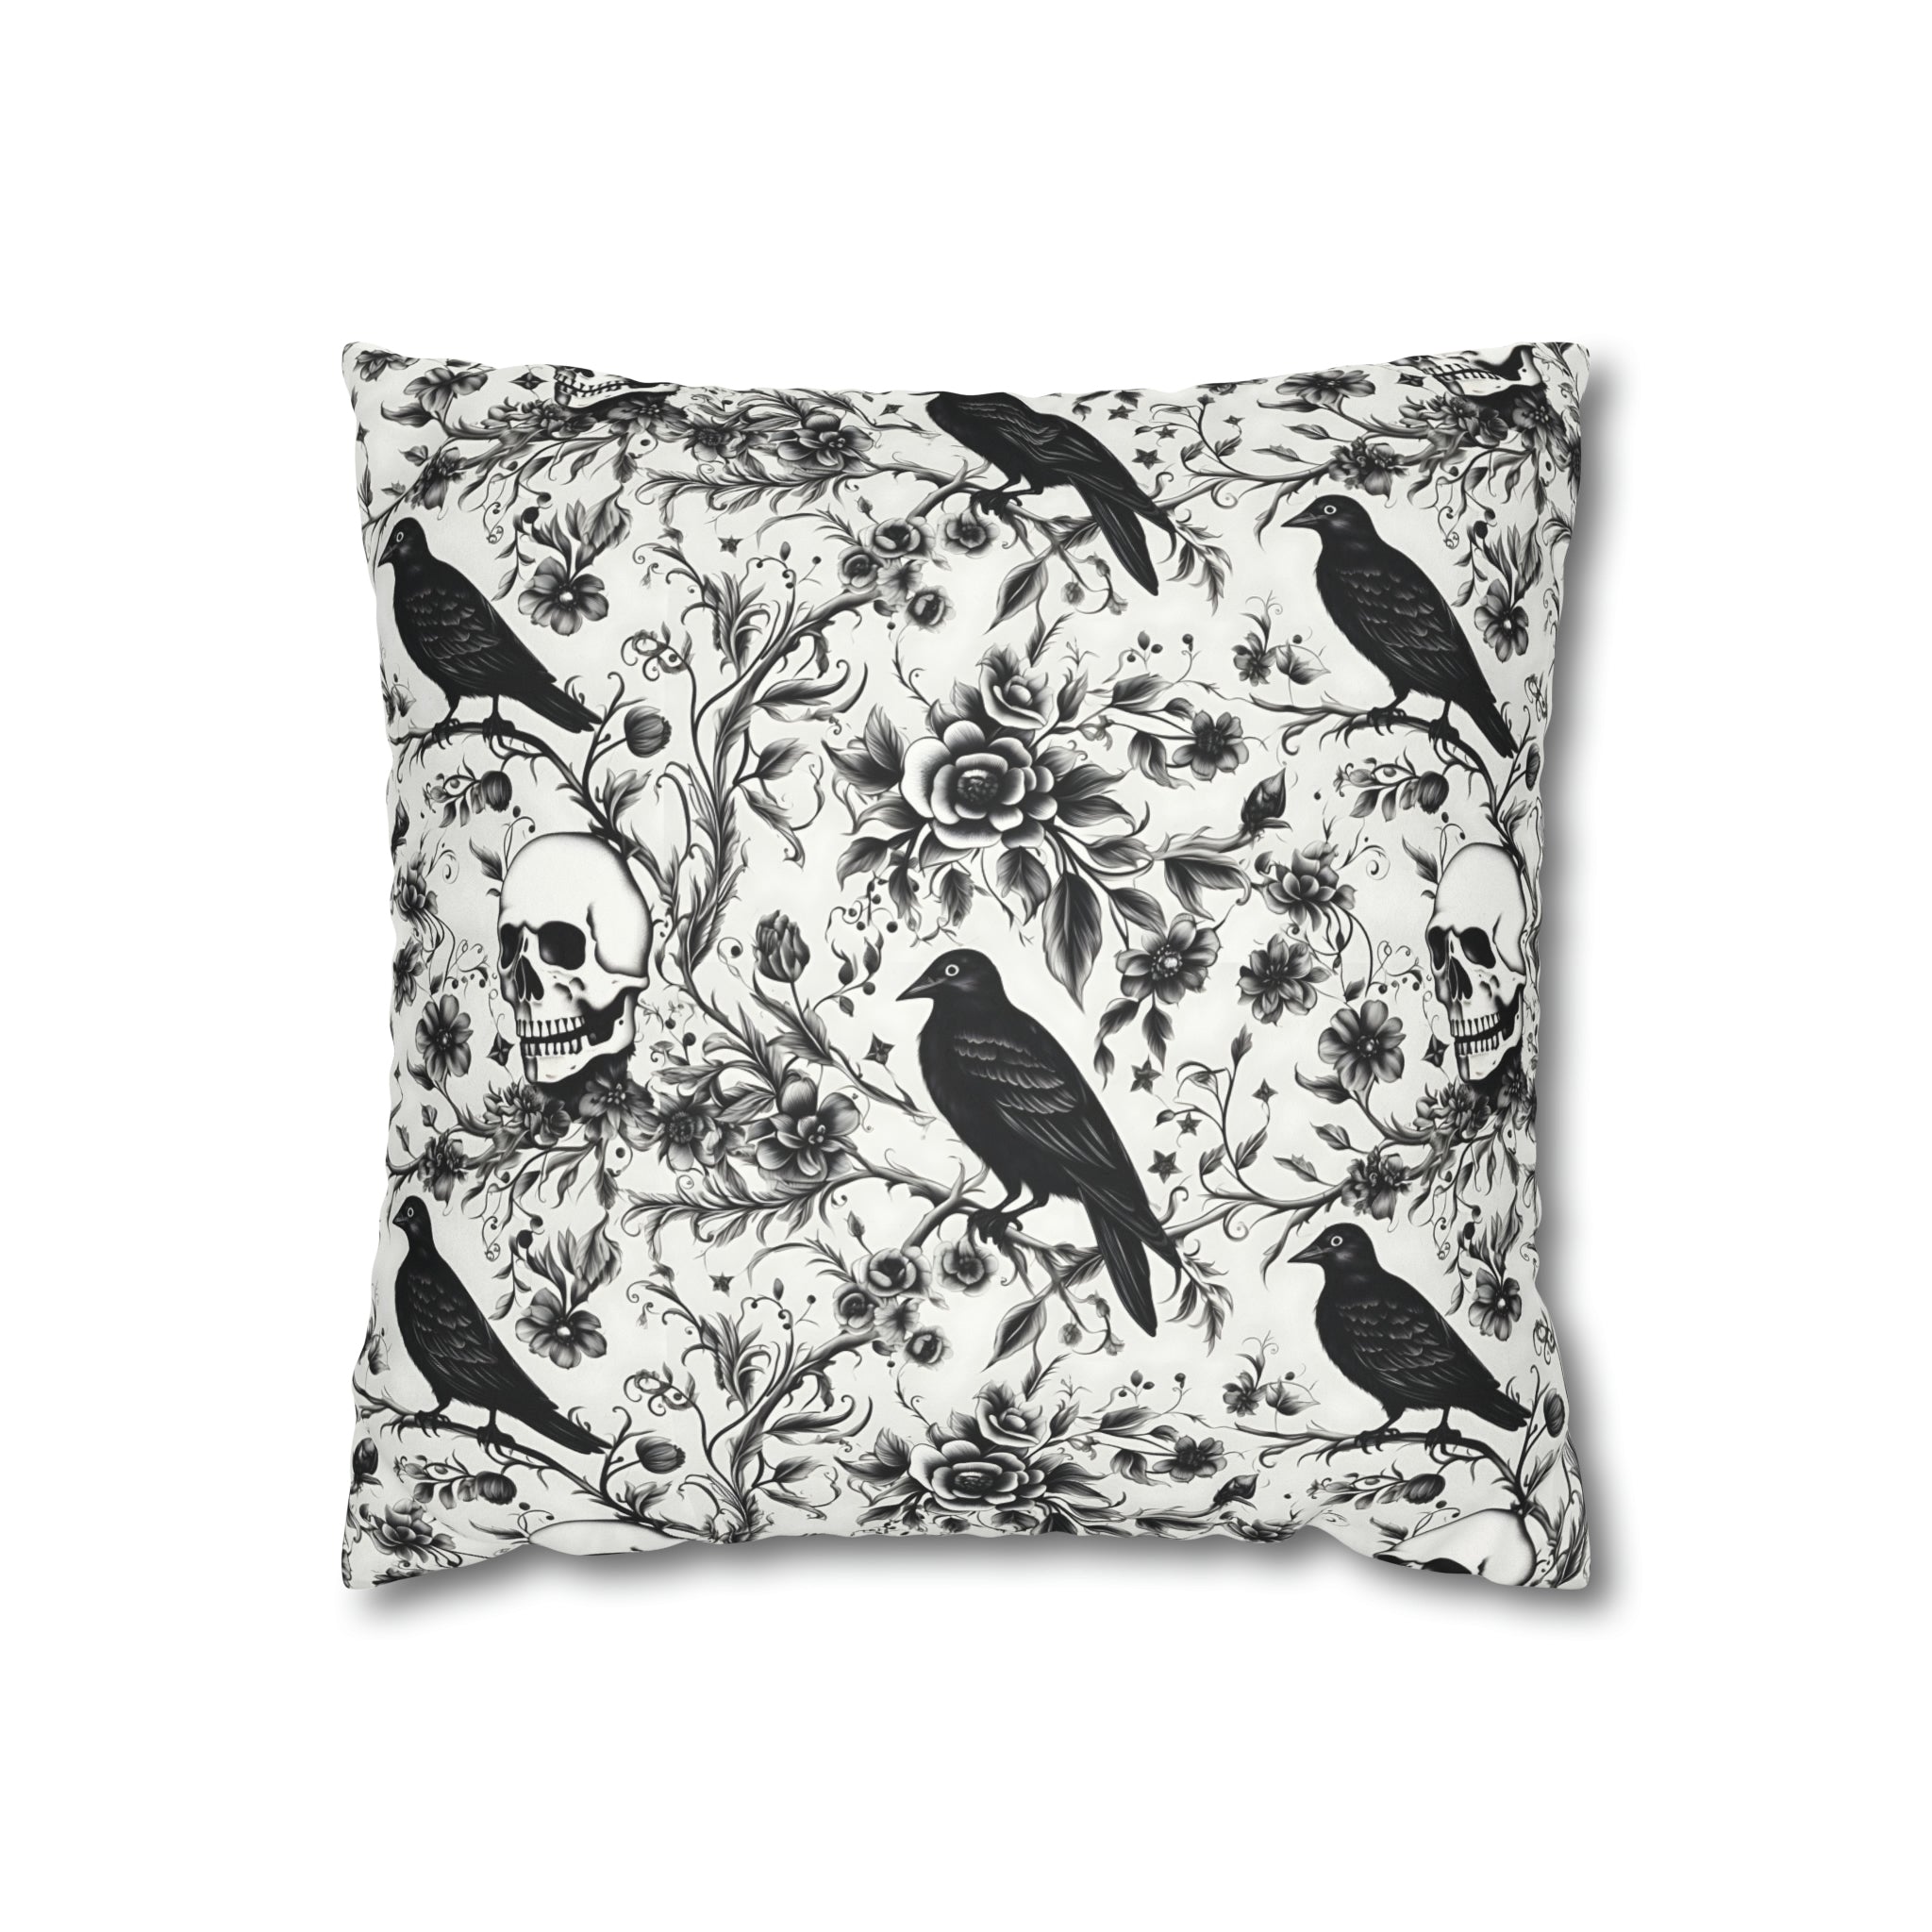 Raven Skull Garden Faux Suede Pillow Cover: Gothic Floral